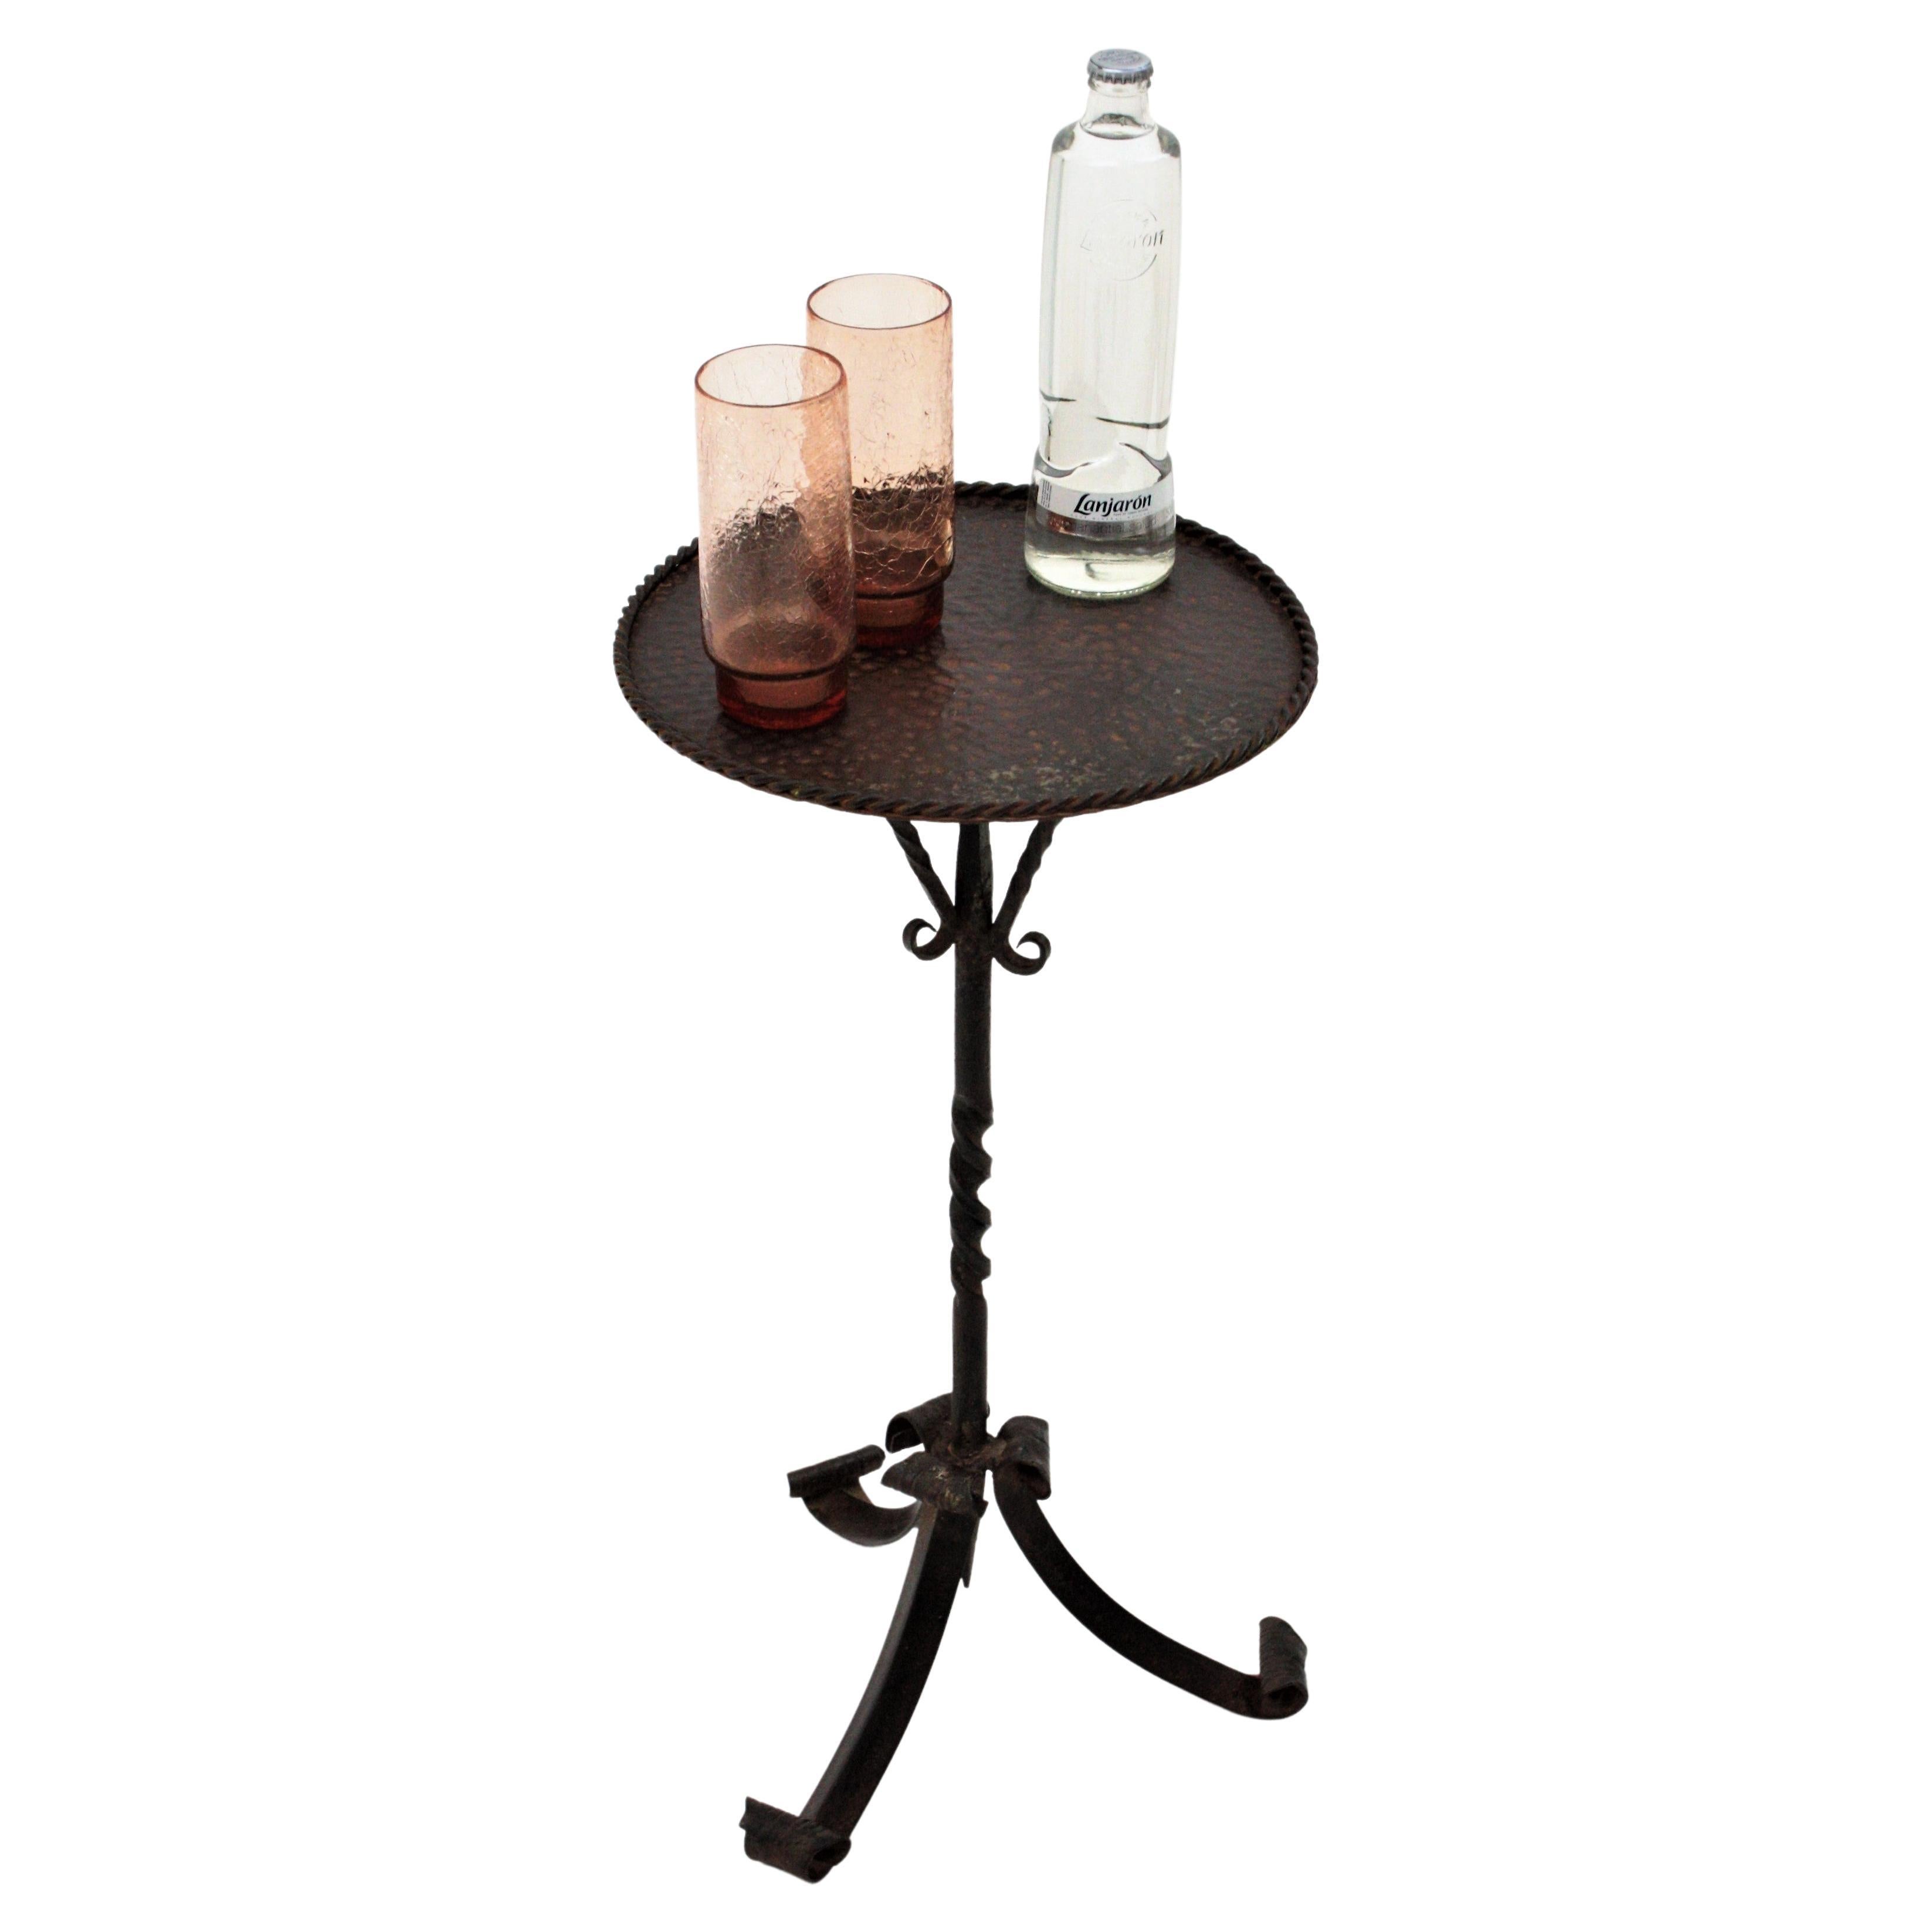 Spanish wrought iron gueridon end table / cocktails table standing on a tripod base, Spain, 1950s.
Handcrafted in wrought iron. The top of this pedestal is heavily adorned by the hammer marks. It stands up on a tripod base with decorative details on